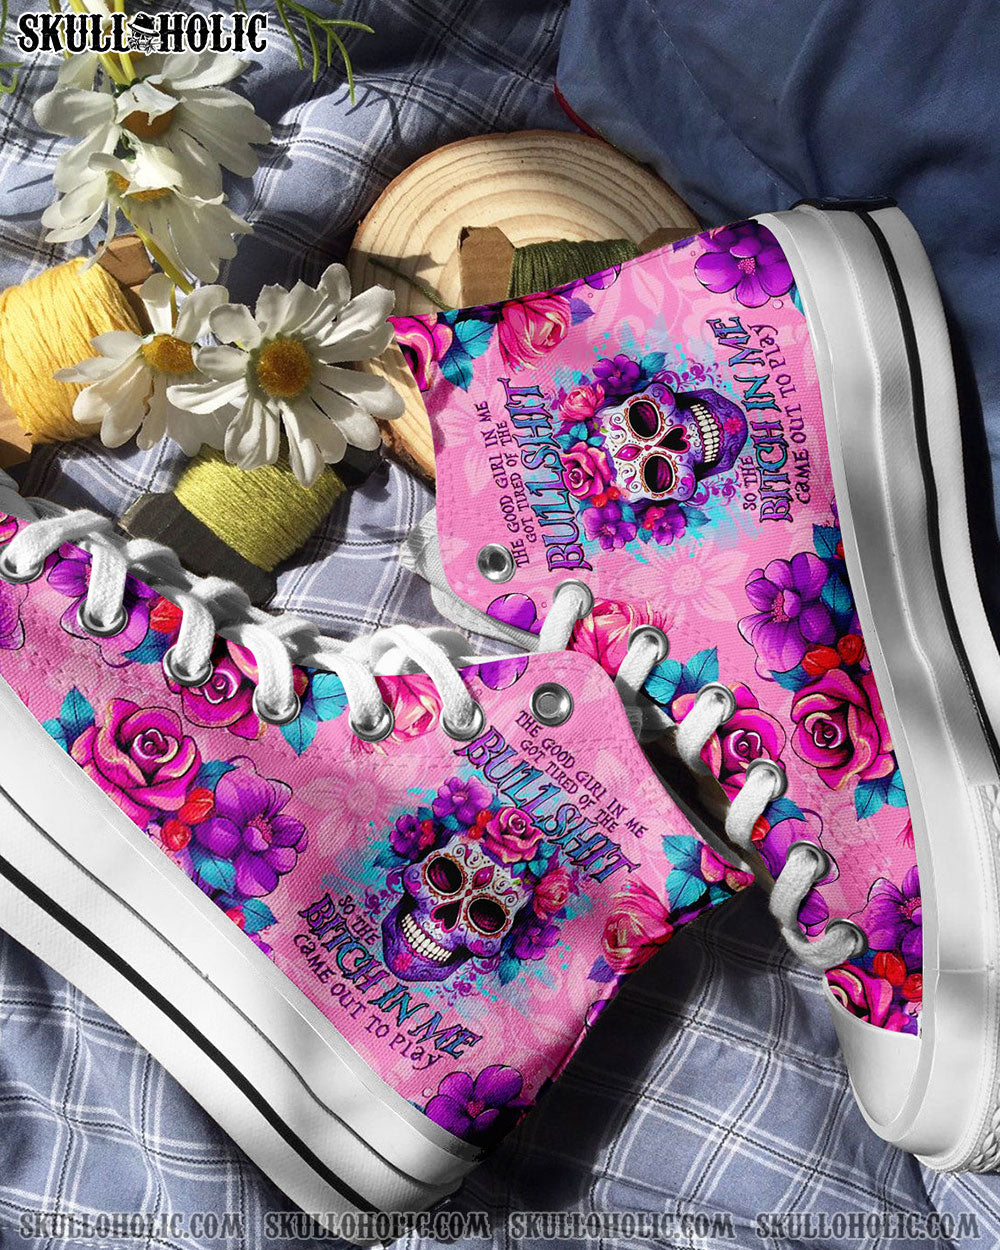 THE GOOD GIRL IN ME SUGAR SKULL HIGH TOP CANVAS SHOES - TLNO2410234